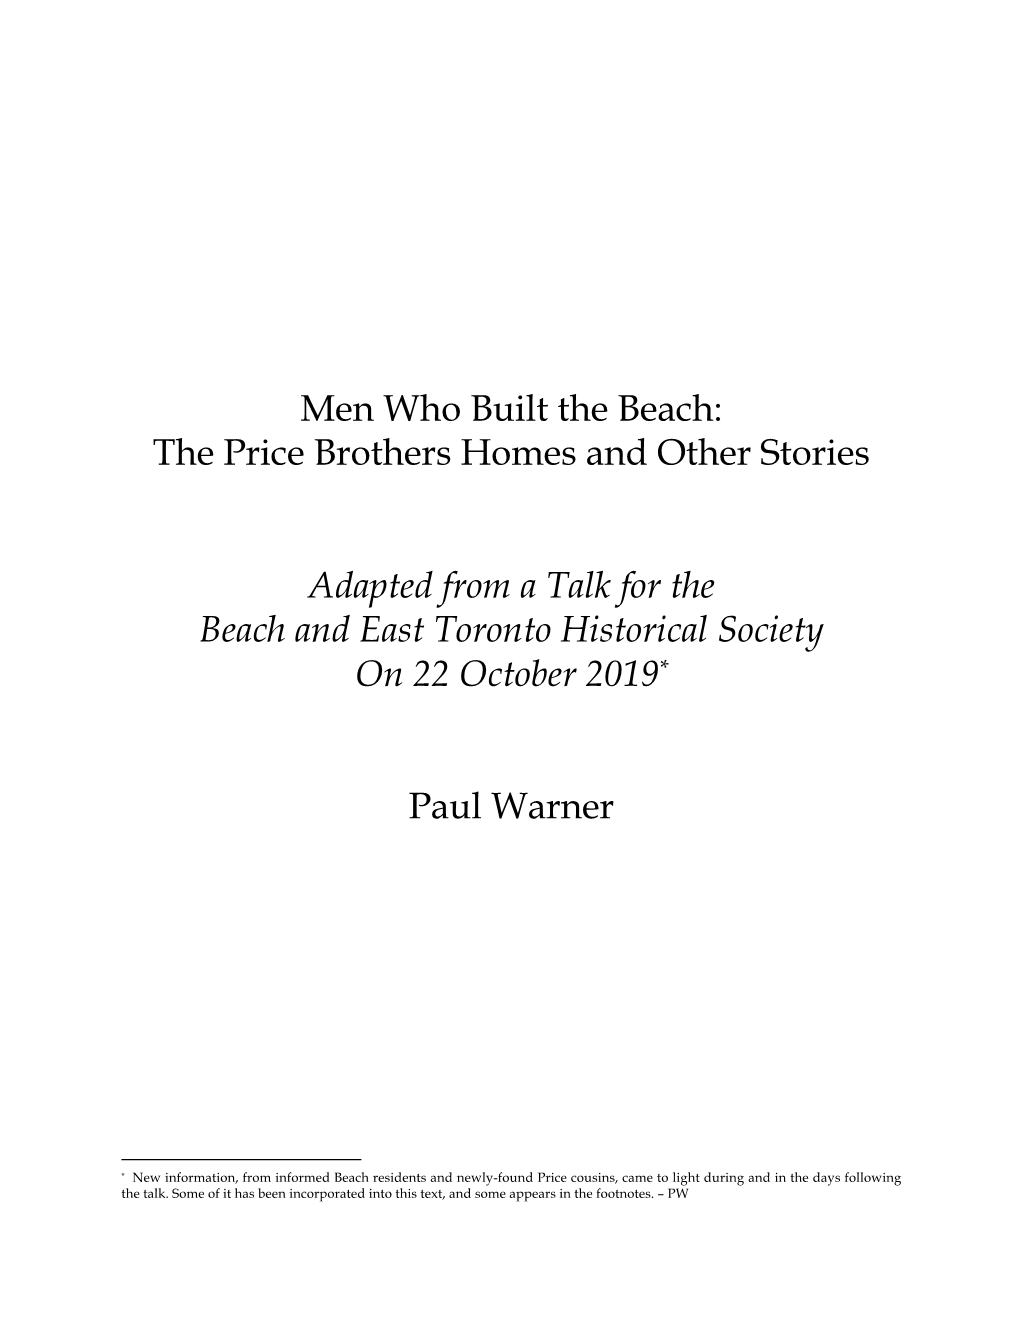 Men Who Built the Beach: the Price Brothers Homes and Other Stories